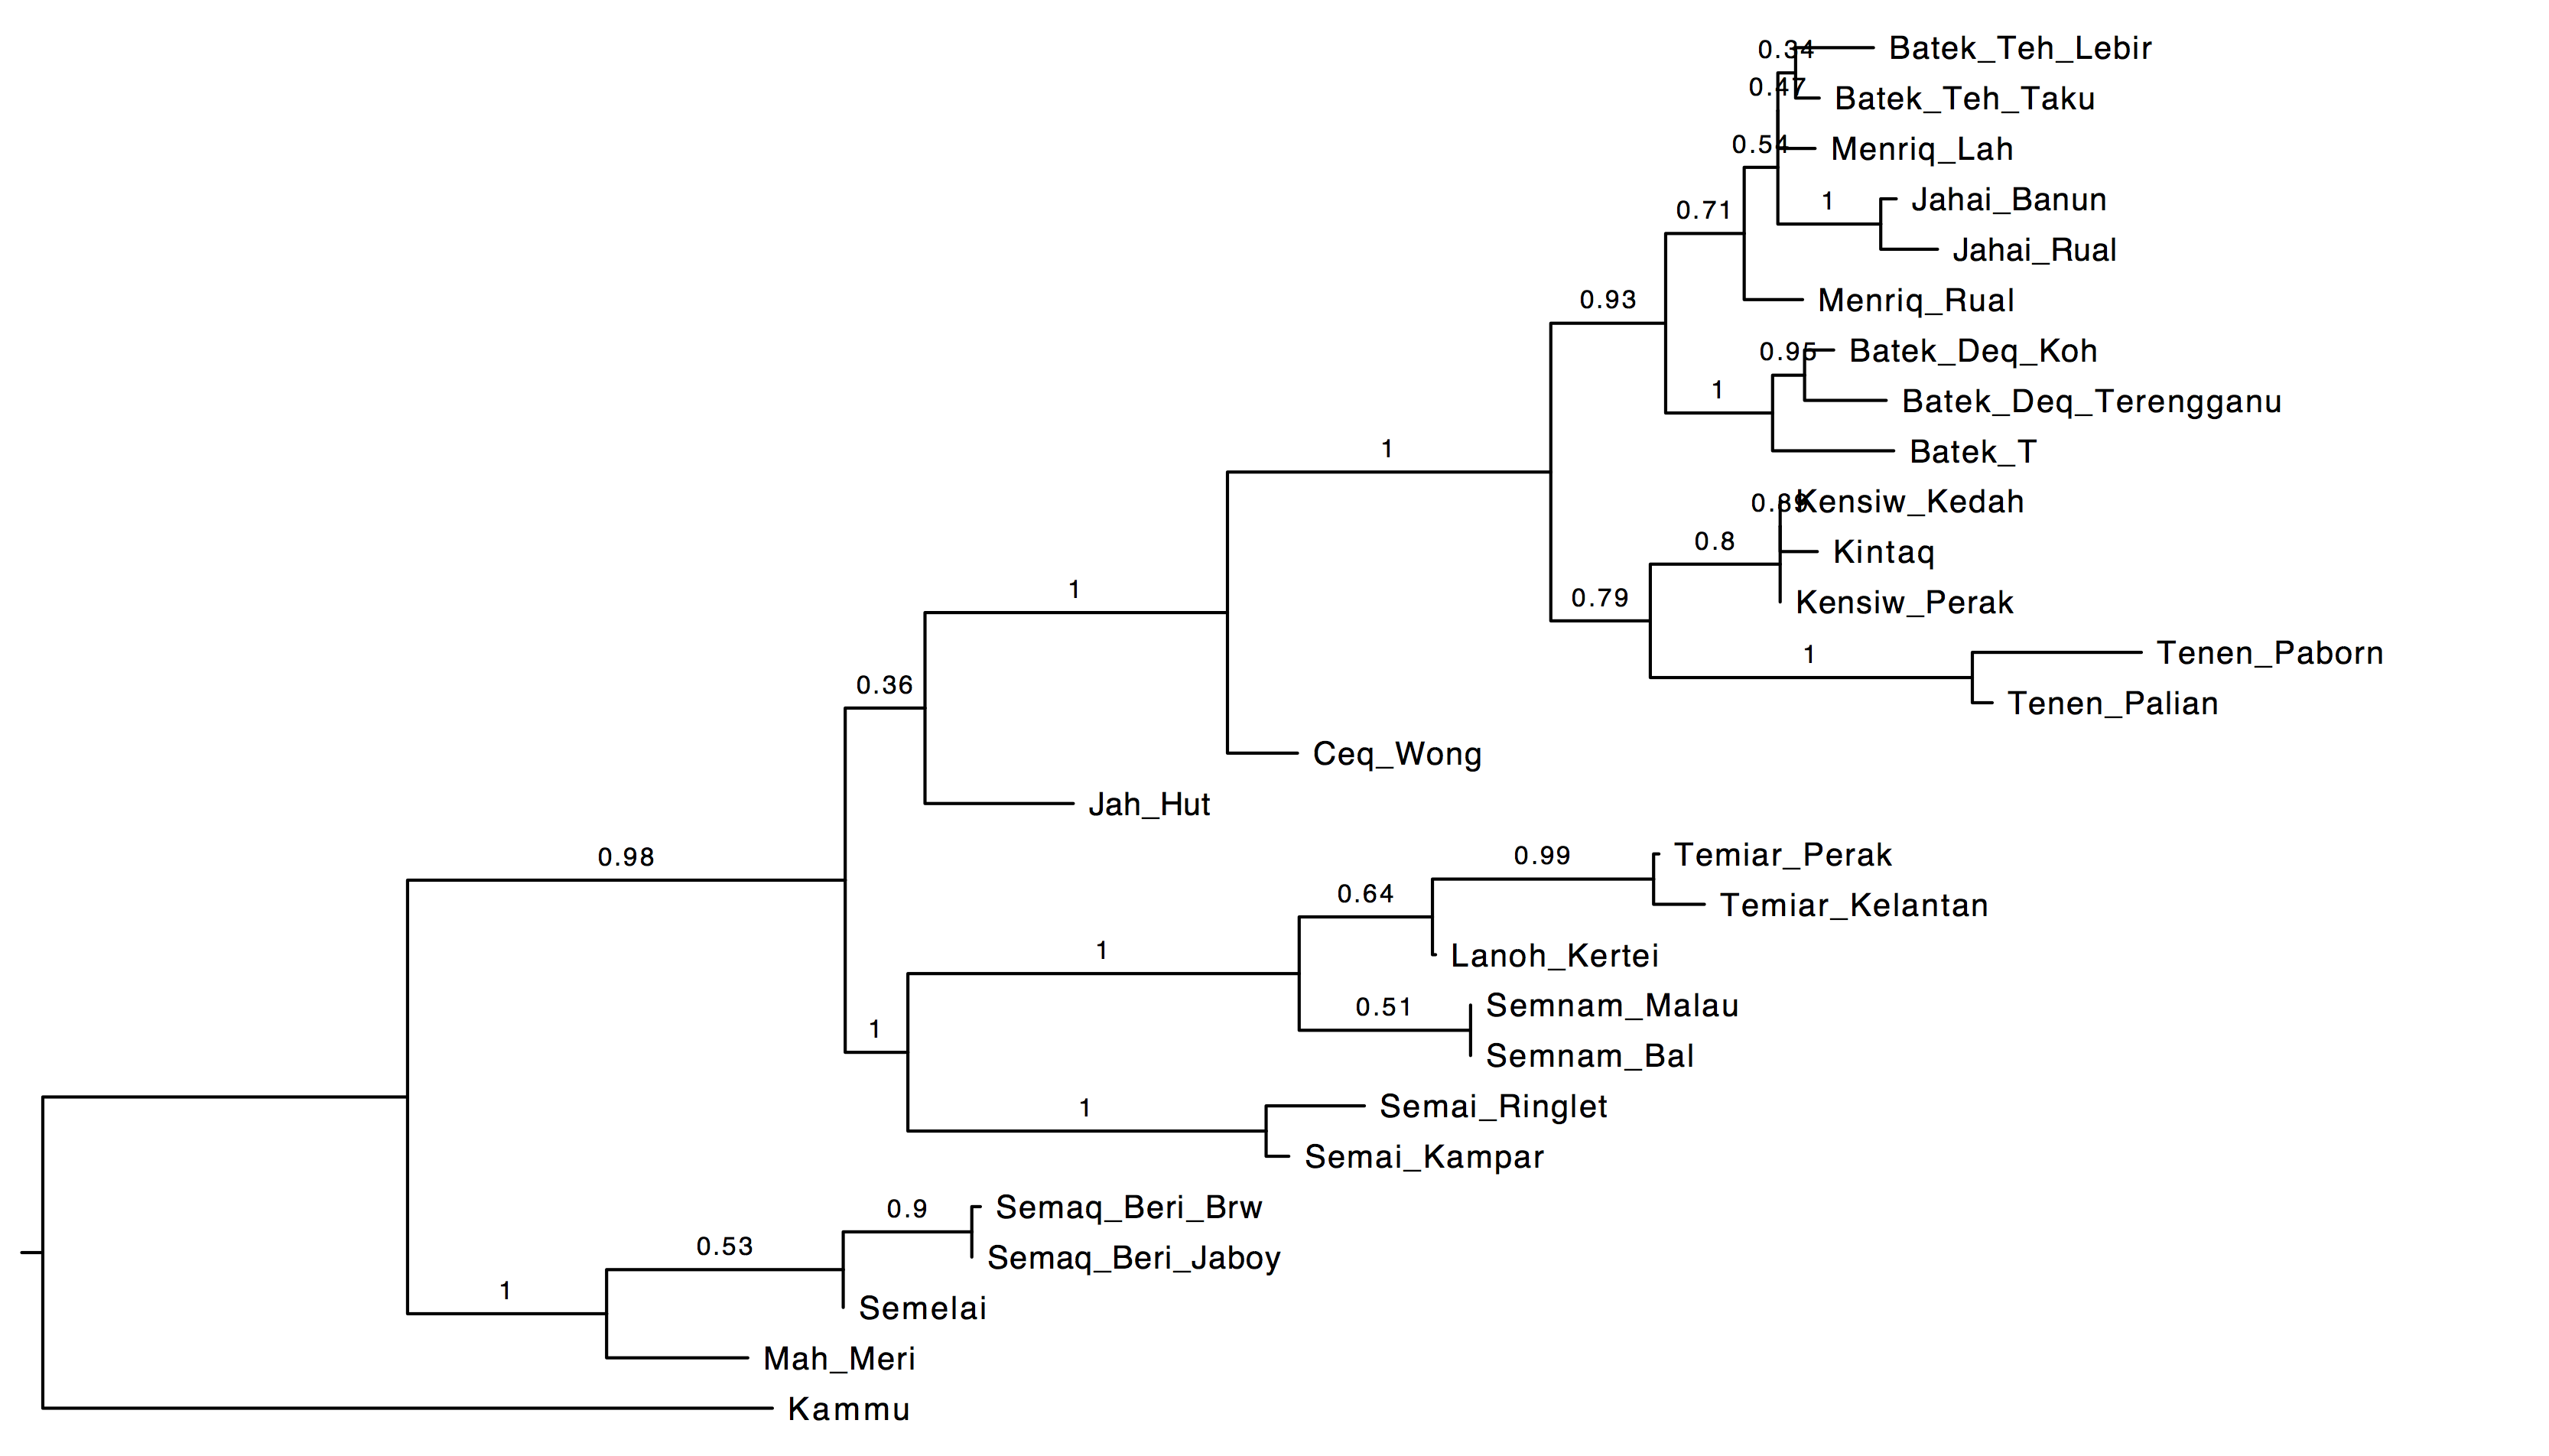 An Aslian family tree from a MCMC search with monophyly constraints
for the North Aslian and South Aslian families (drawing by FigTree with
posterior probabilities on
branches).